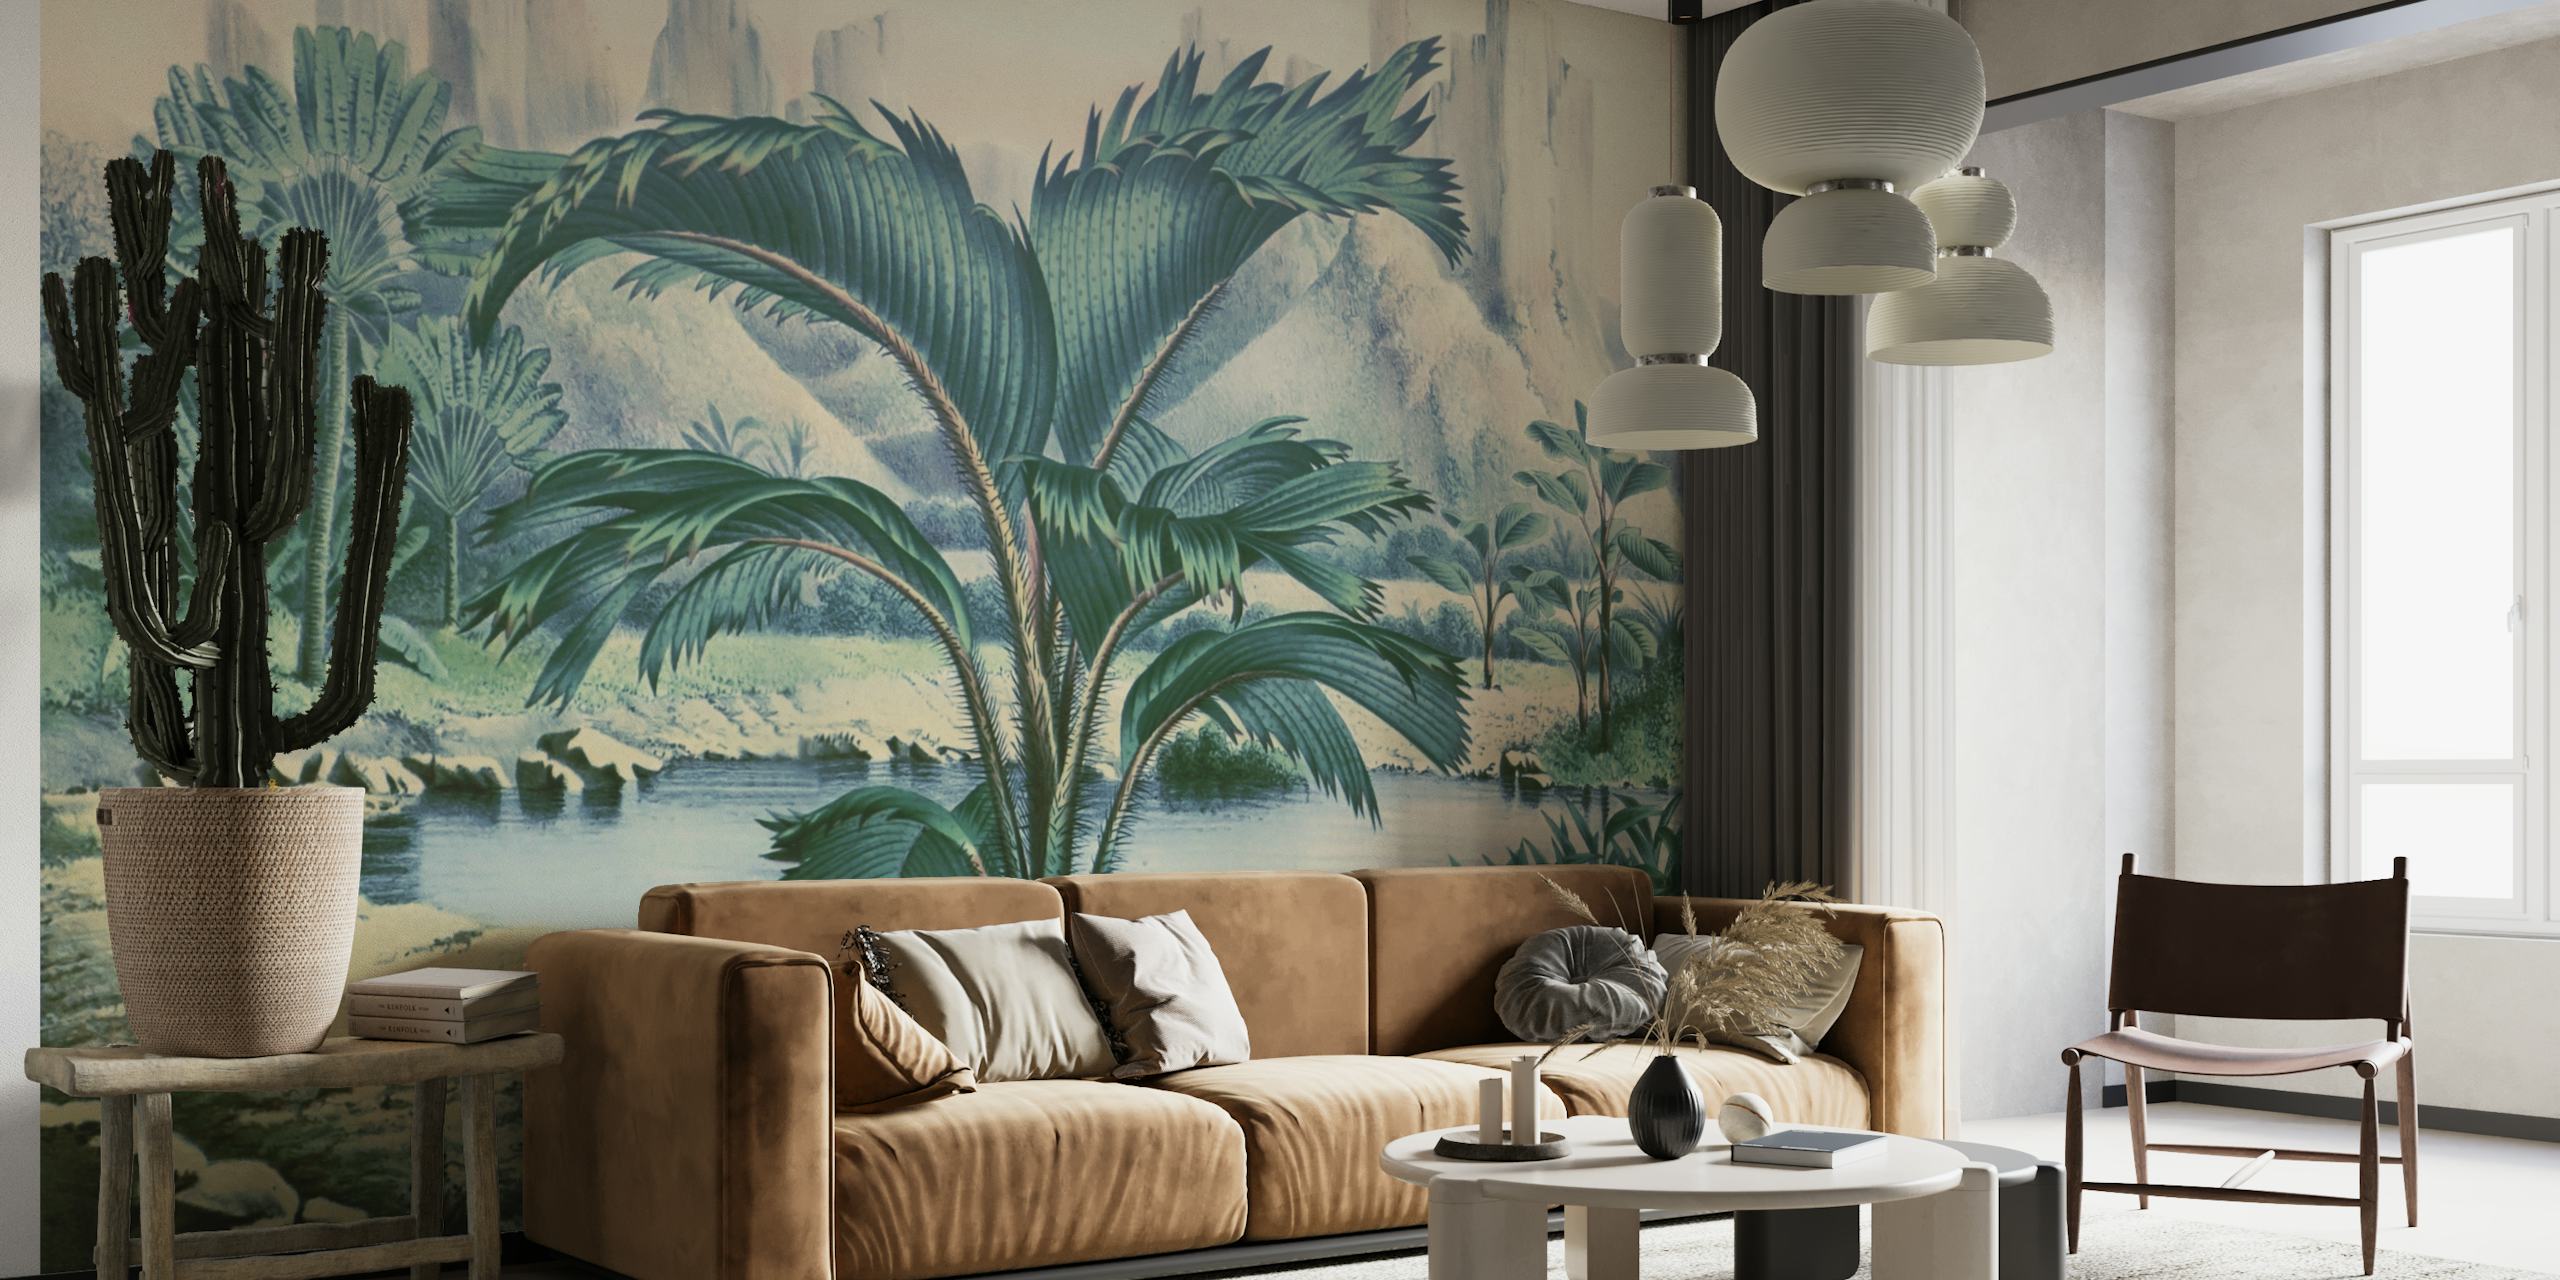 Tropical Scenery With Palm wallpaper